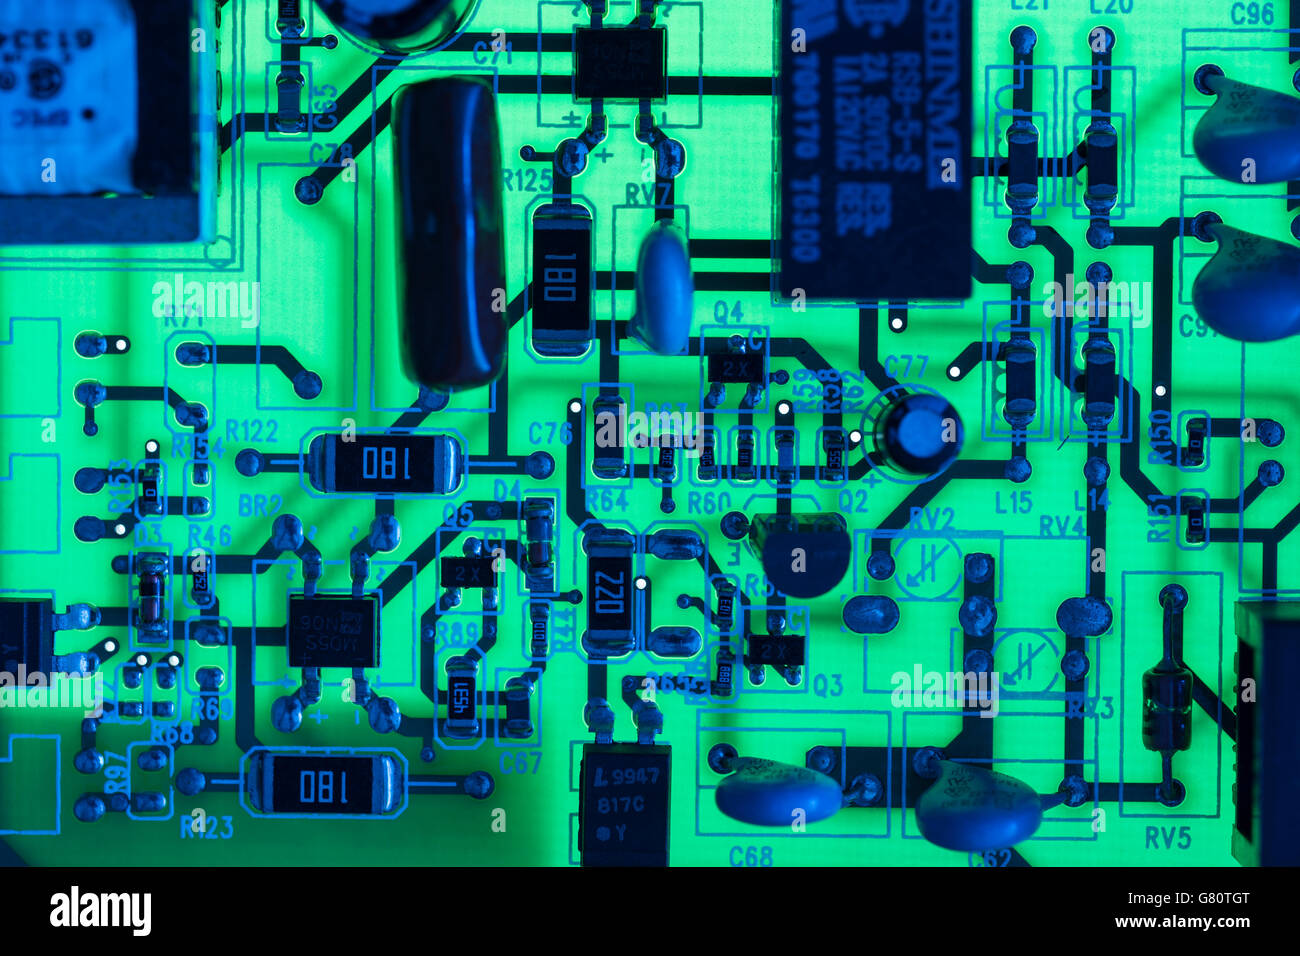 Technology concept . Circuit board / pcb showing components lit with blue and green light. Wiring inside computer, circuit close up, electronics. Stock Photo